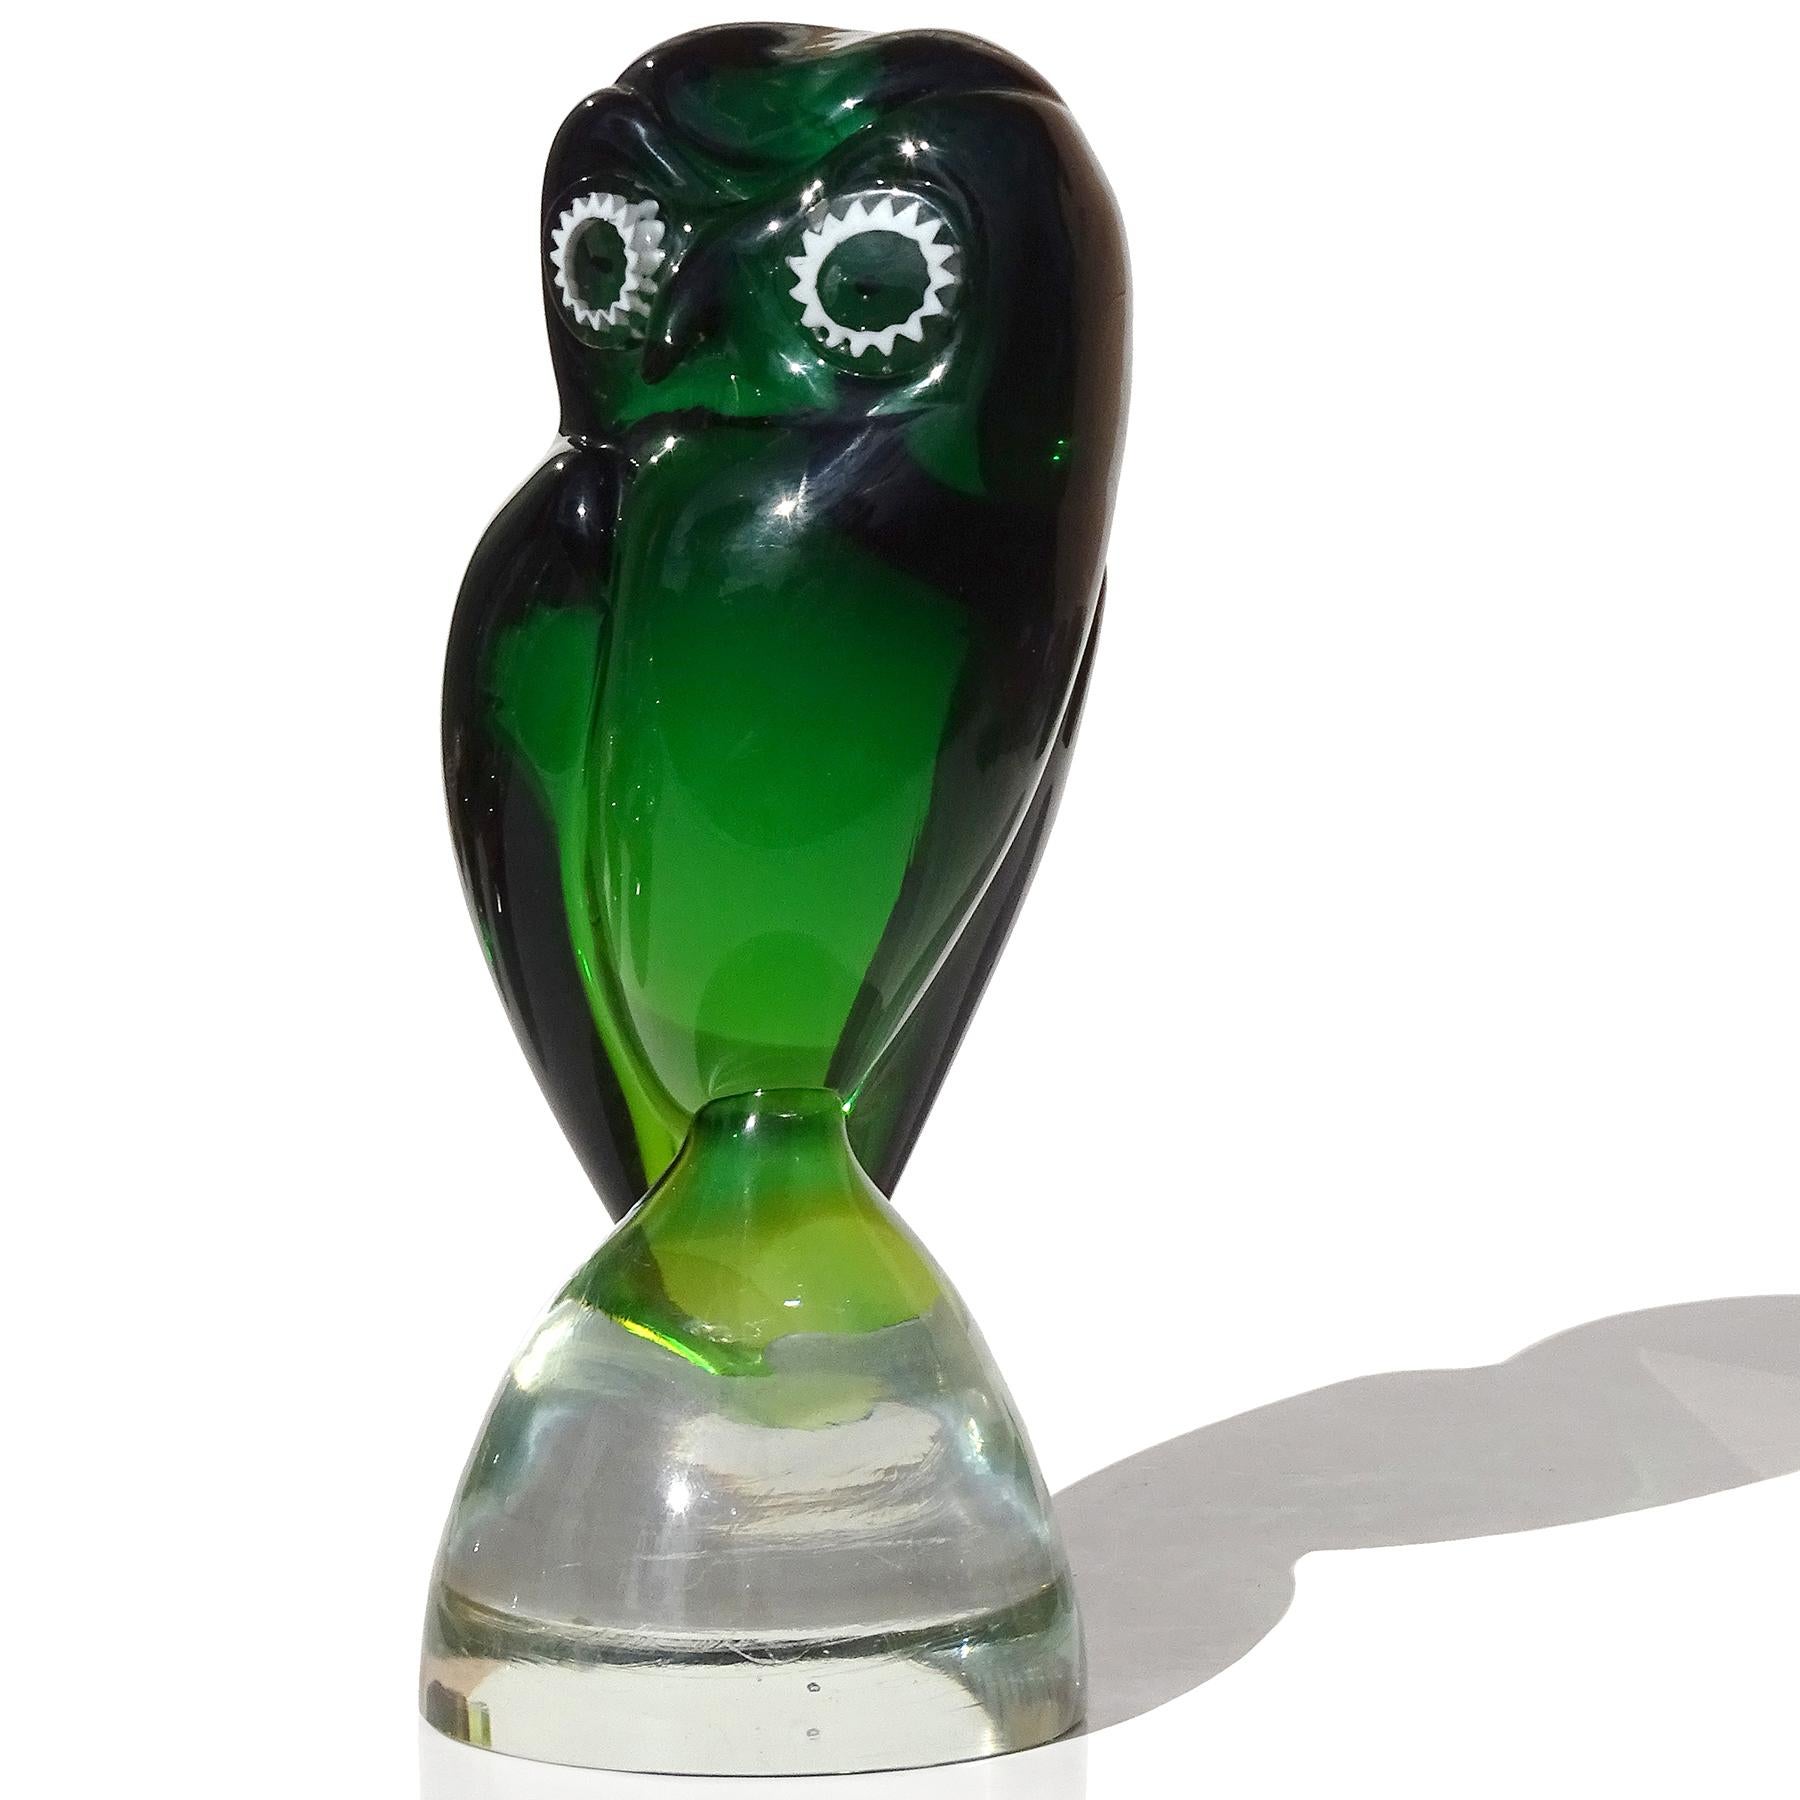 Beautiful vintage Murano hand blown Sommerso dark to lighter emerald green Italian art glass owl bird figure, sculpture. Documented to the Salviati Company. Have owned several with labels and signatures before. The owl has white on clear murrines